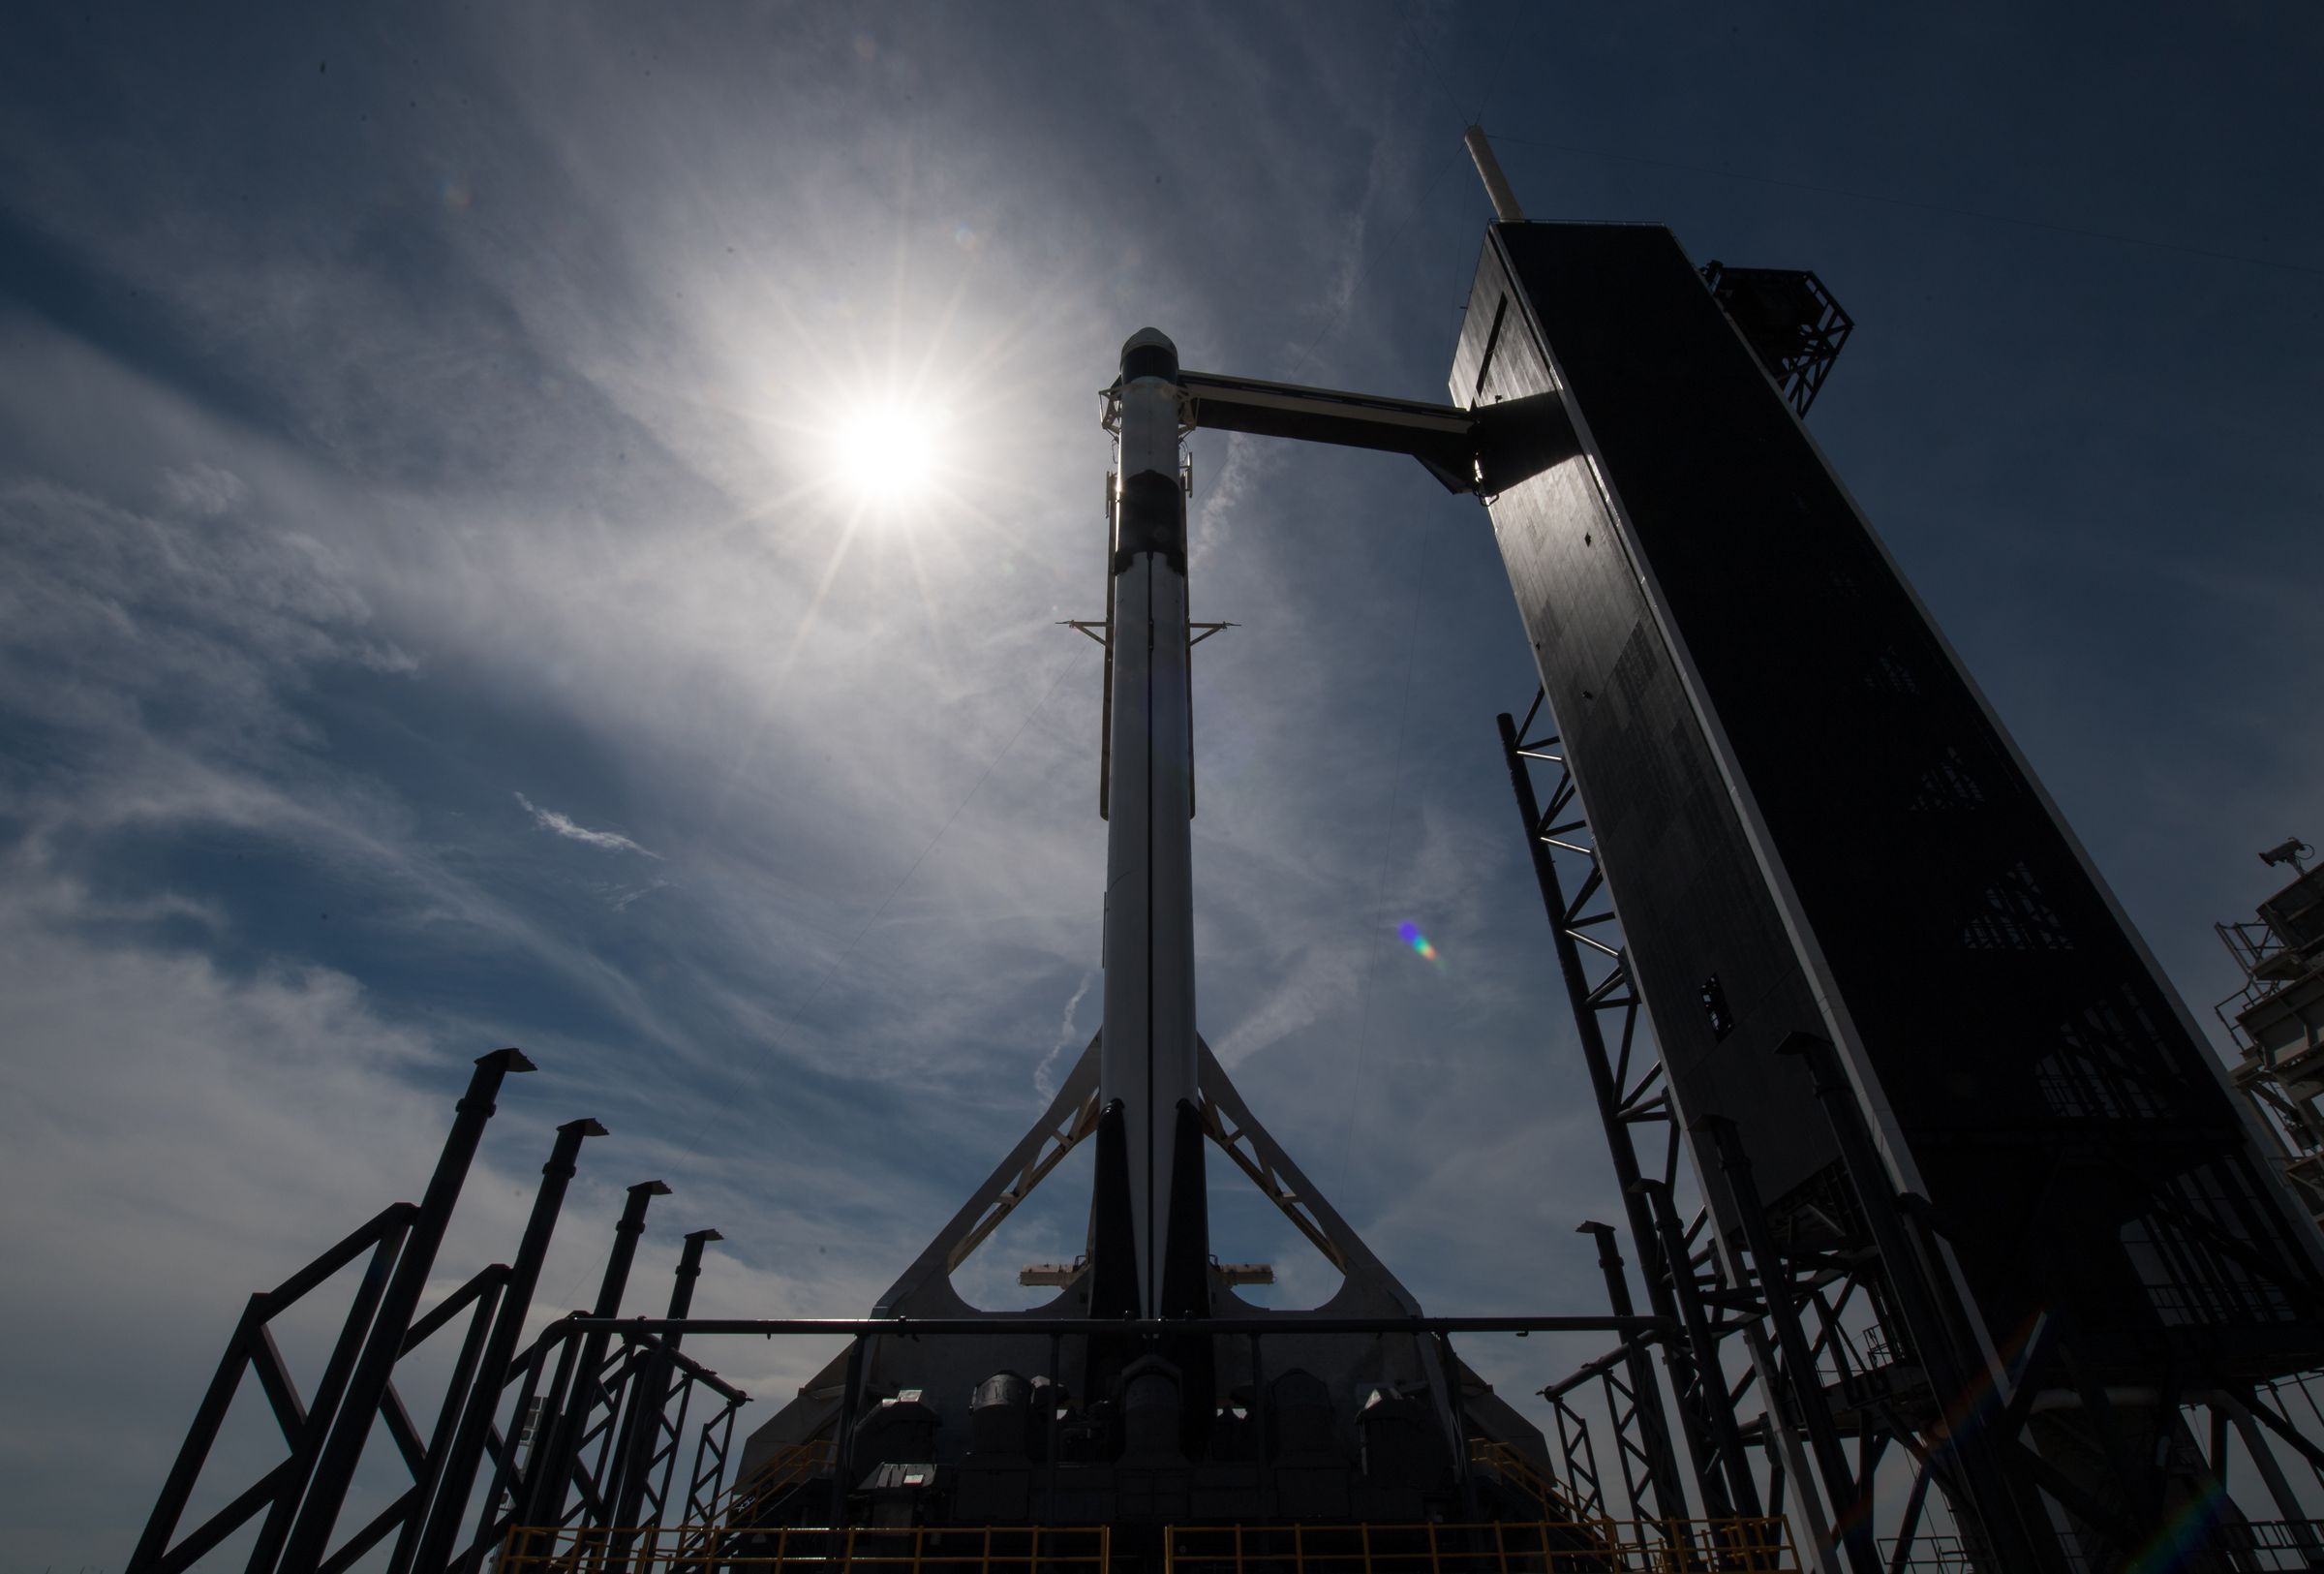 SpaceX’s Falcon 9 and Crew Dragon on the launchpad at Kennedy Space Center